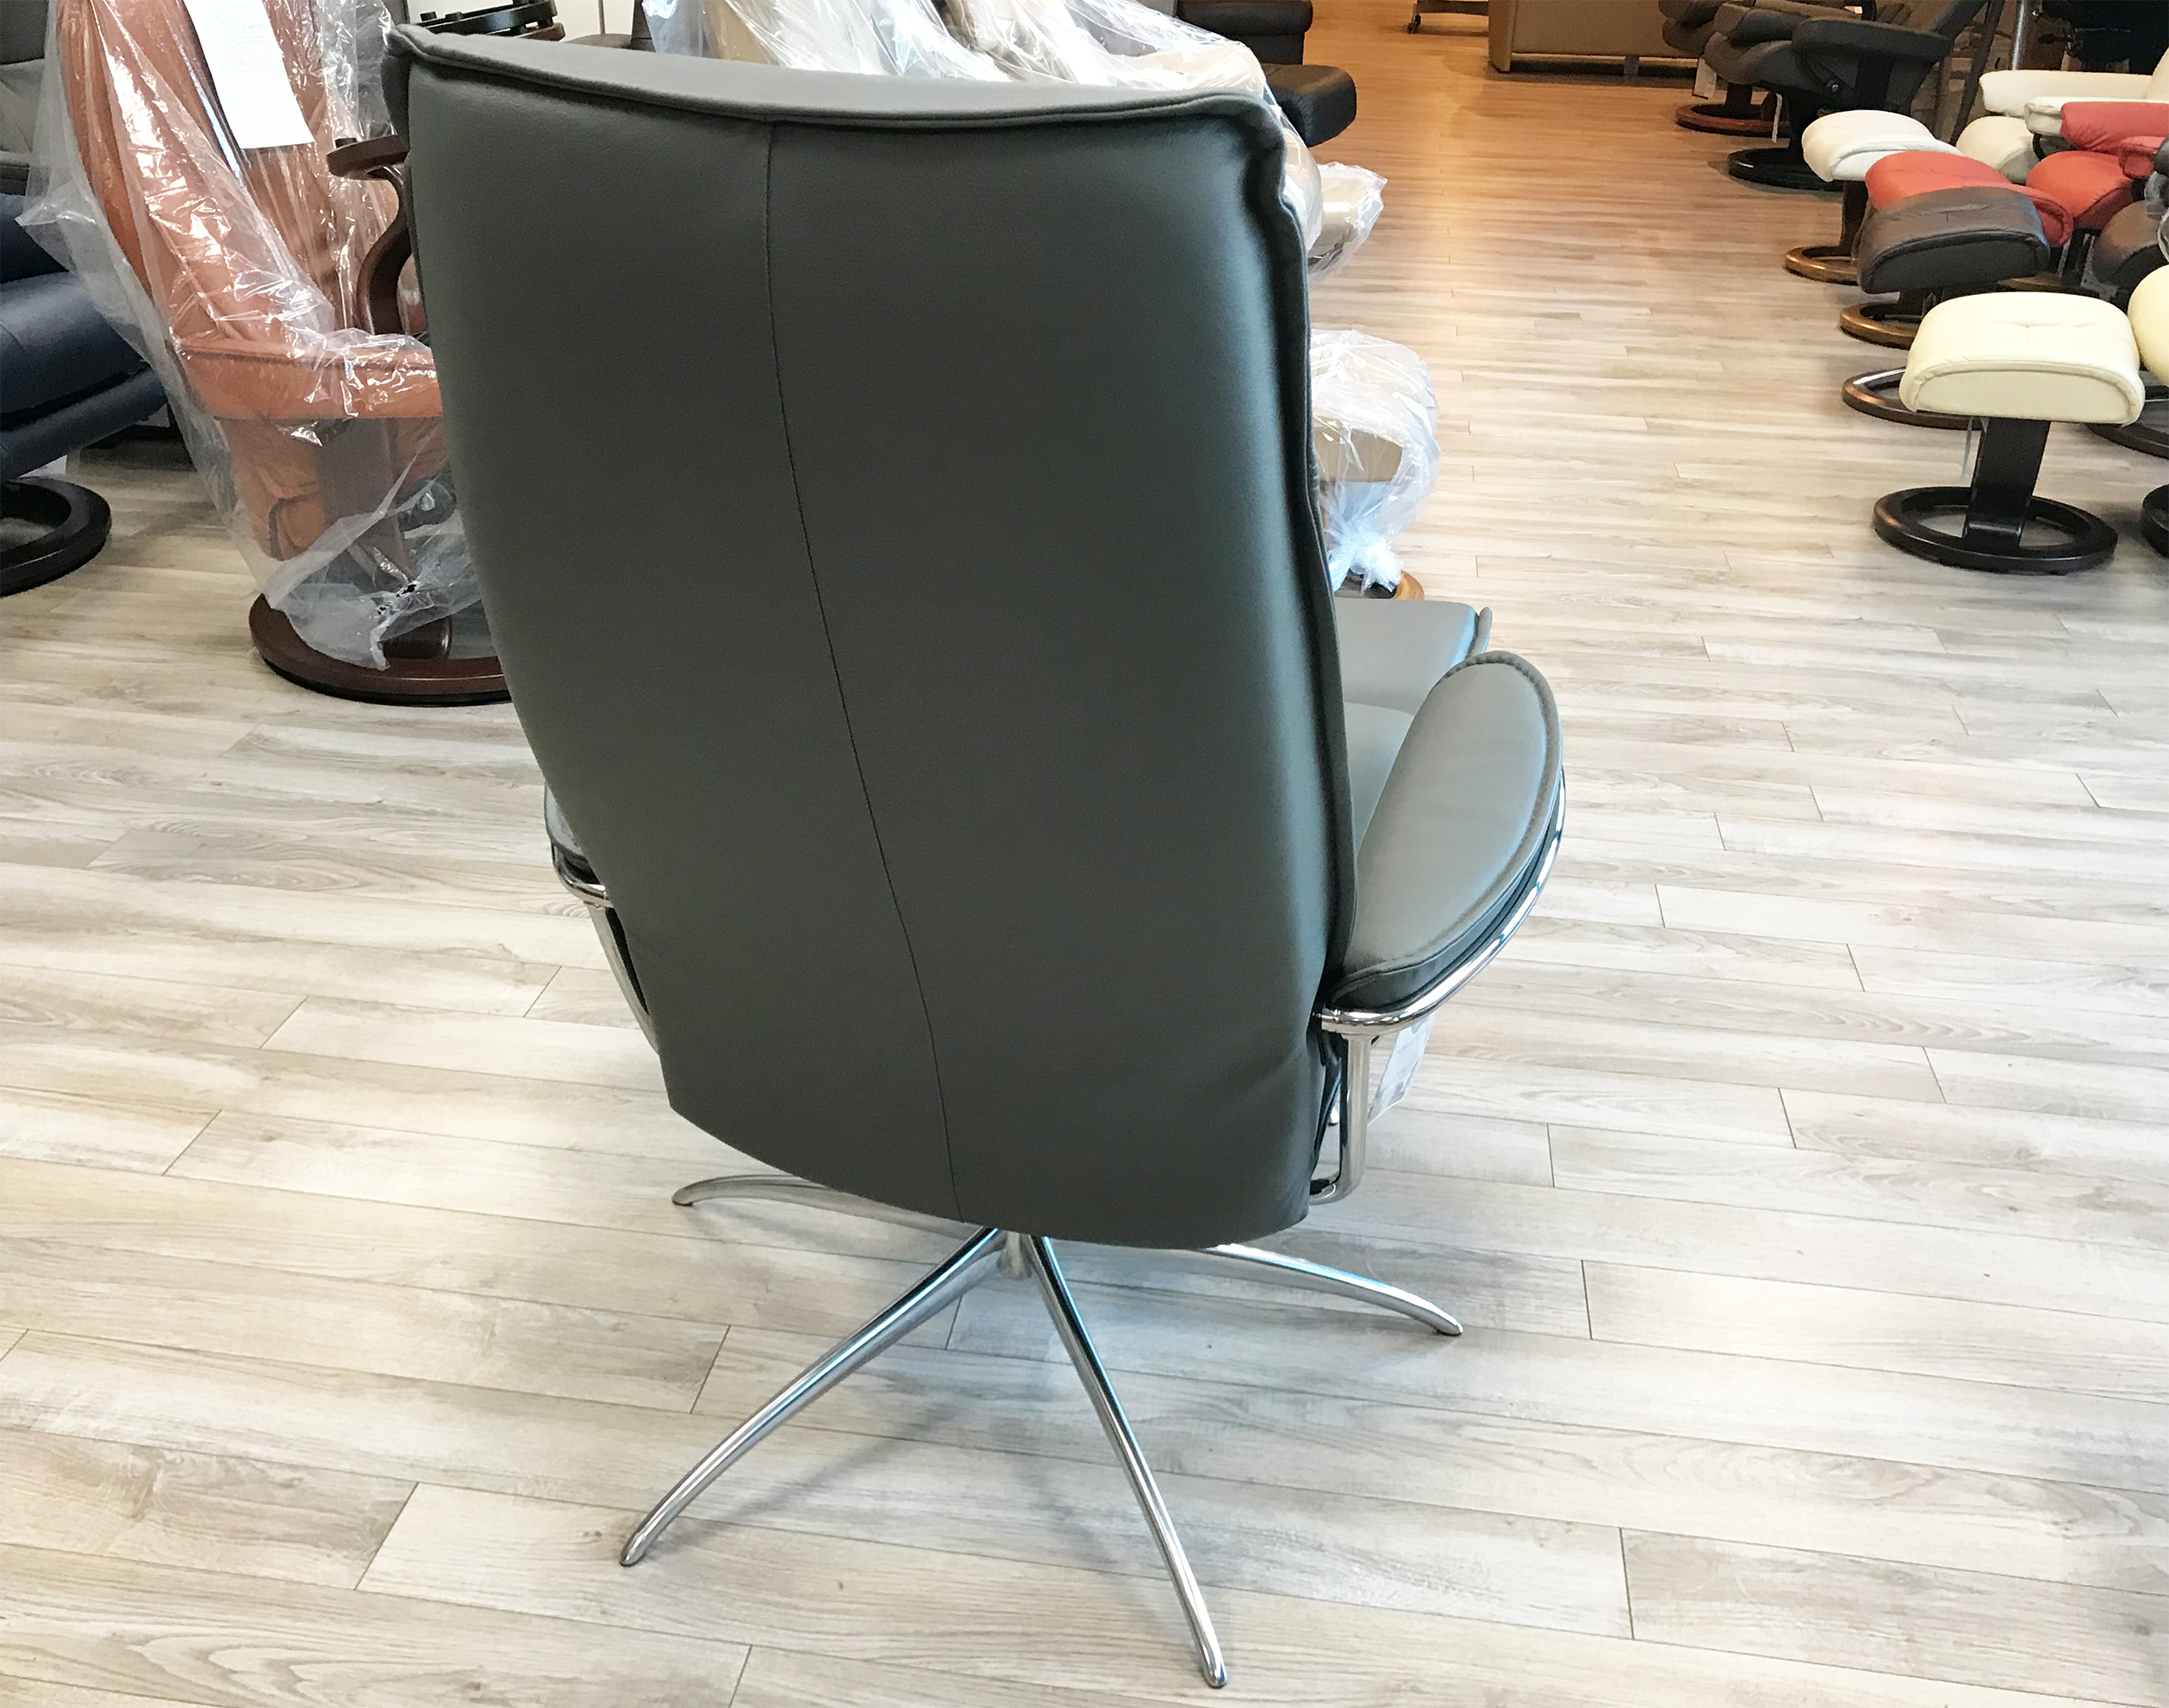 Stressless City High Back Stressless Back Leather High Batick Leather - Grey Recliners City Chairs Grey by Ekornes Batick